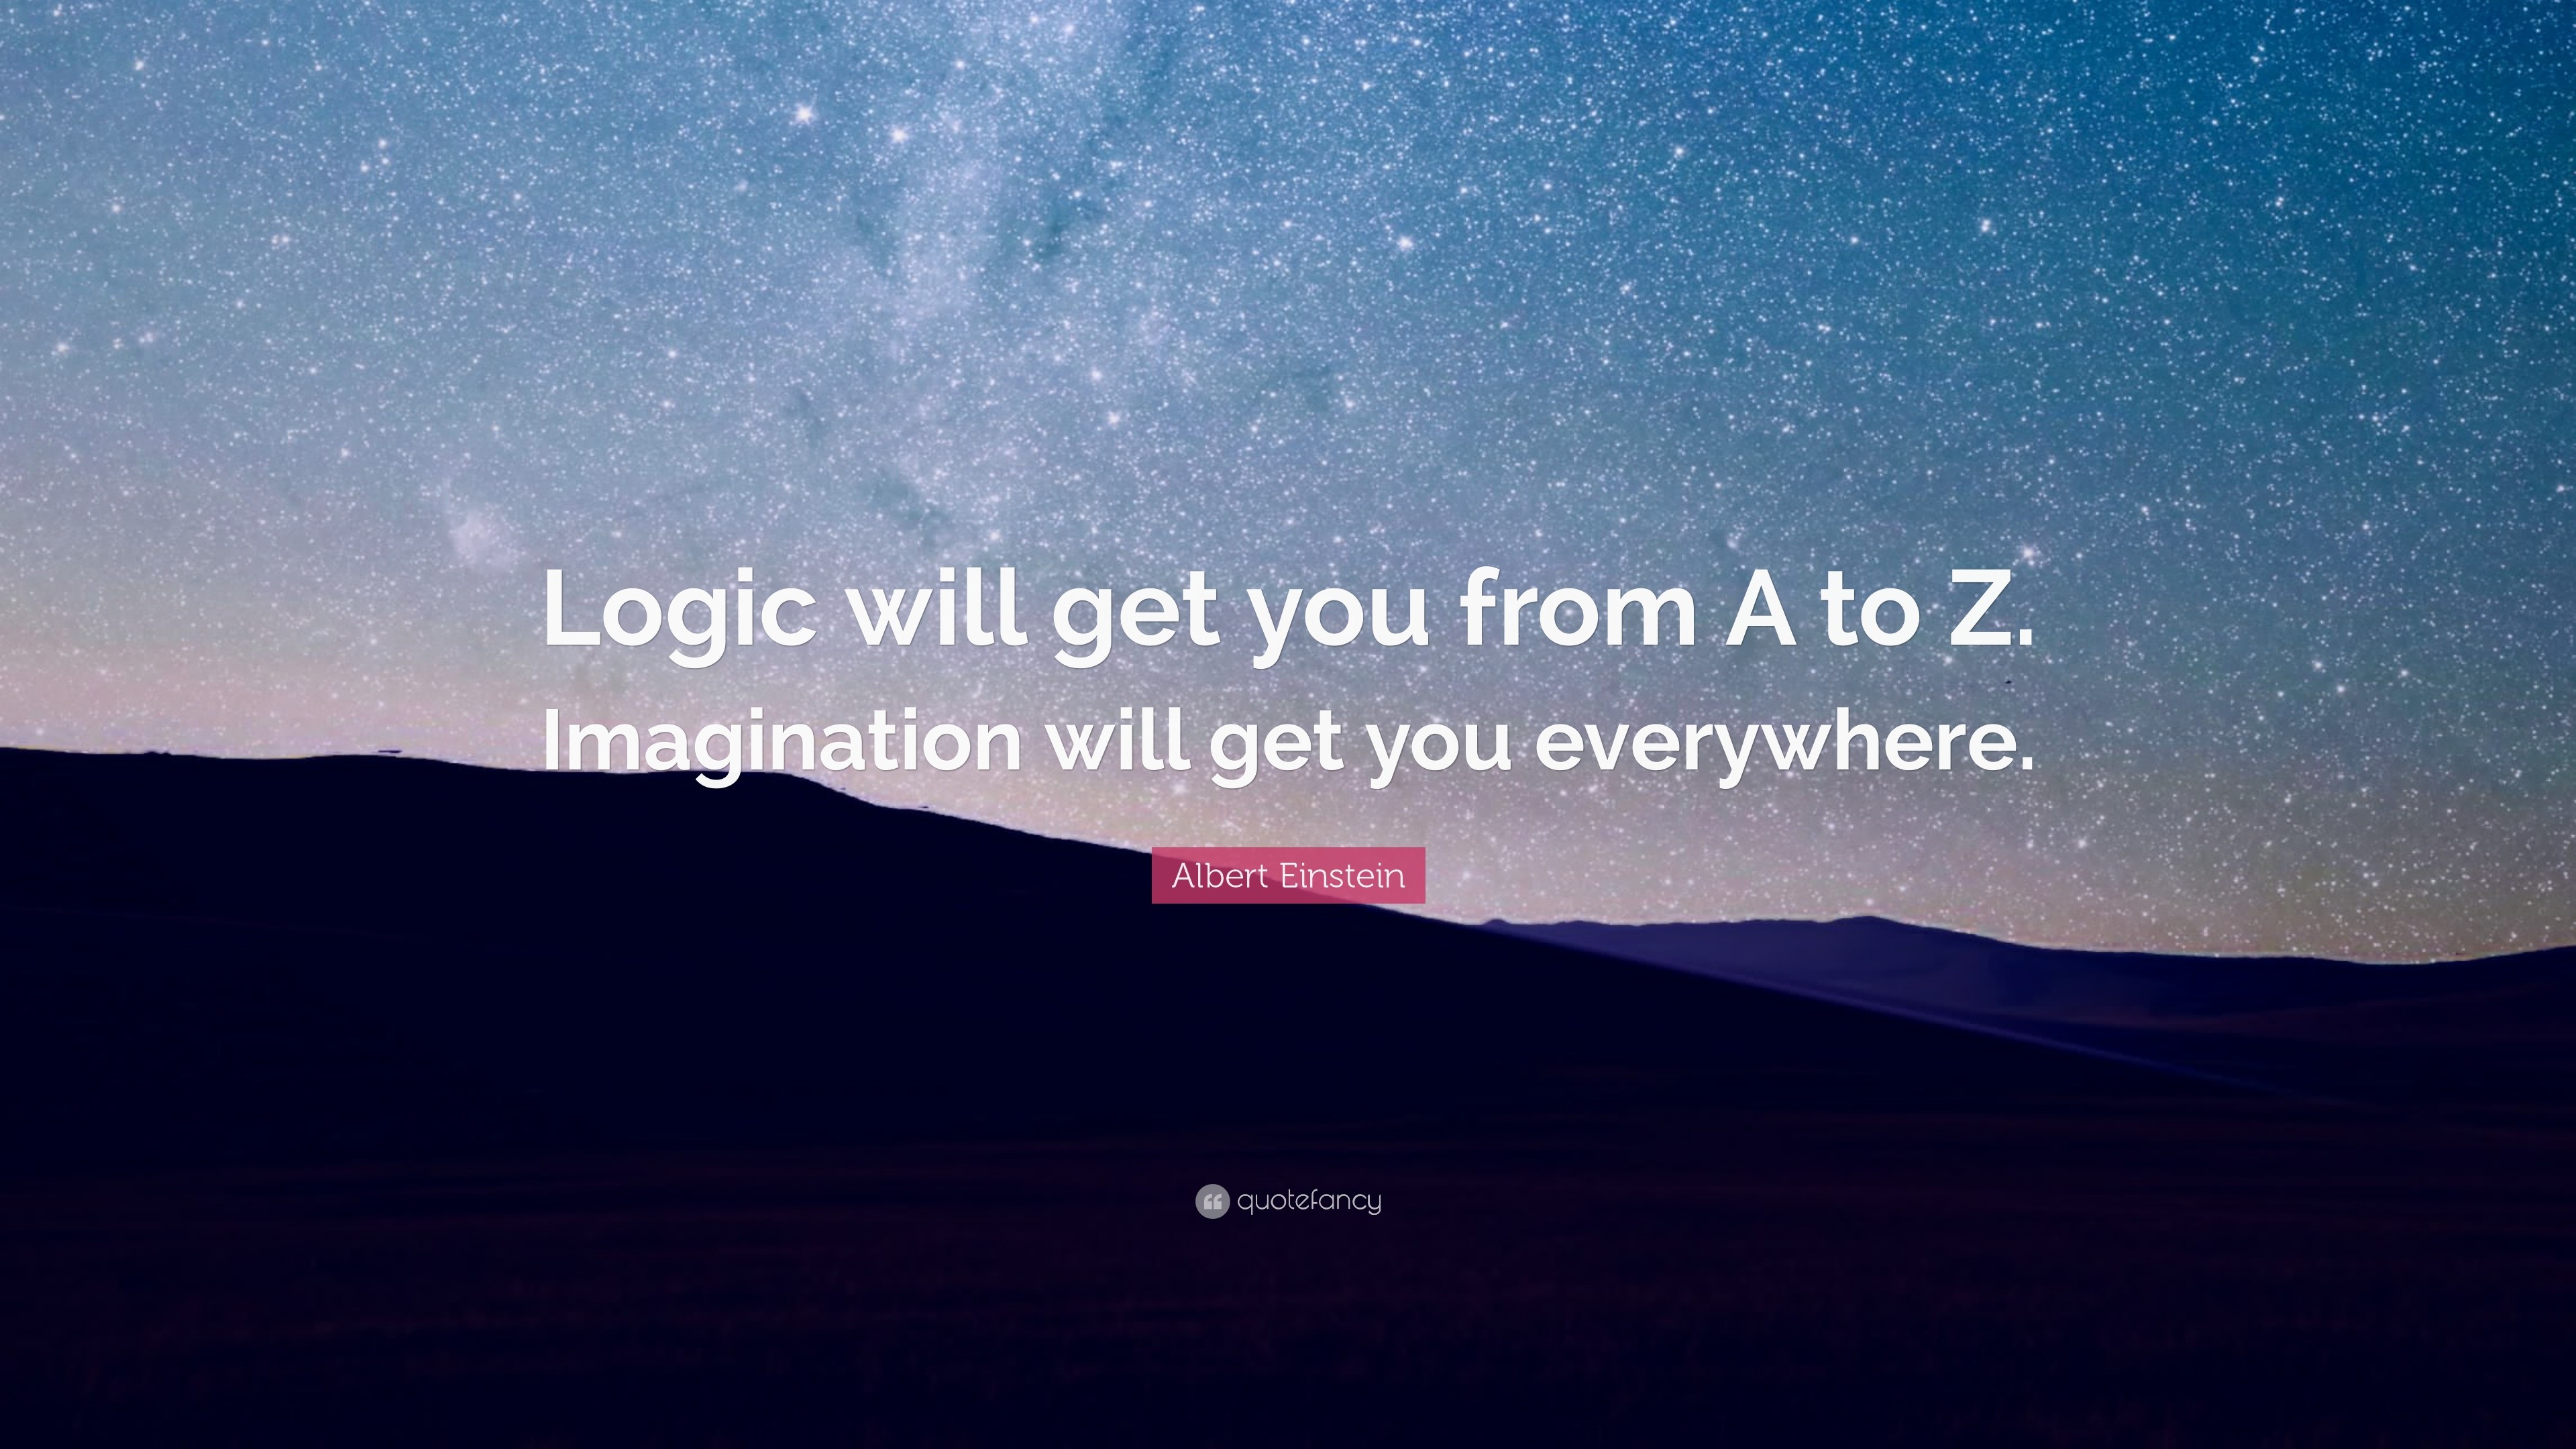 Albert Einstein Quote: “Logic will get you from A to Z. Imagination